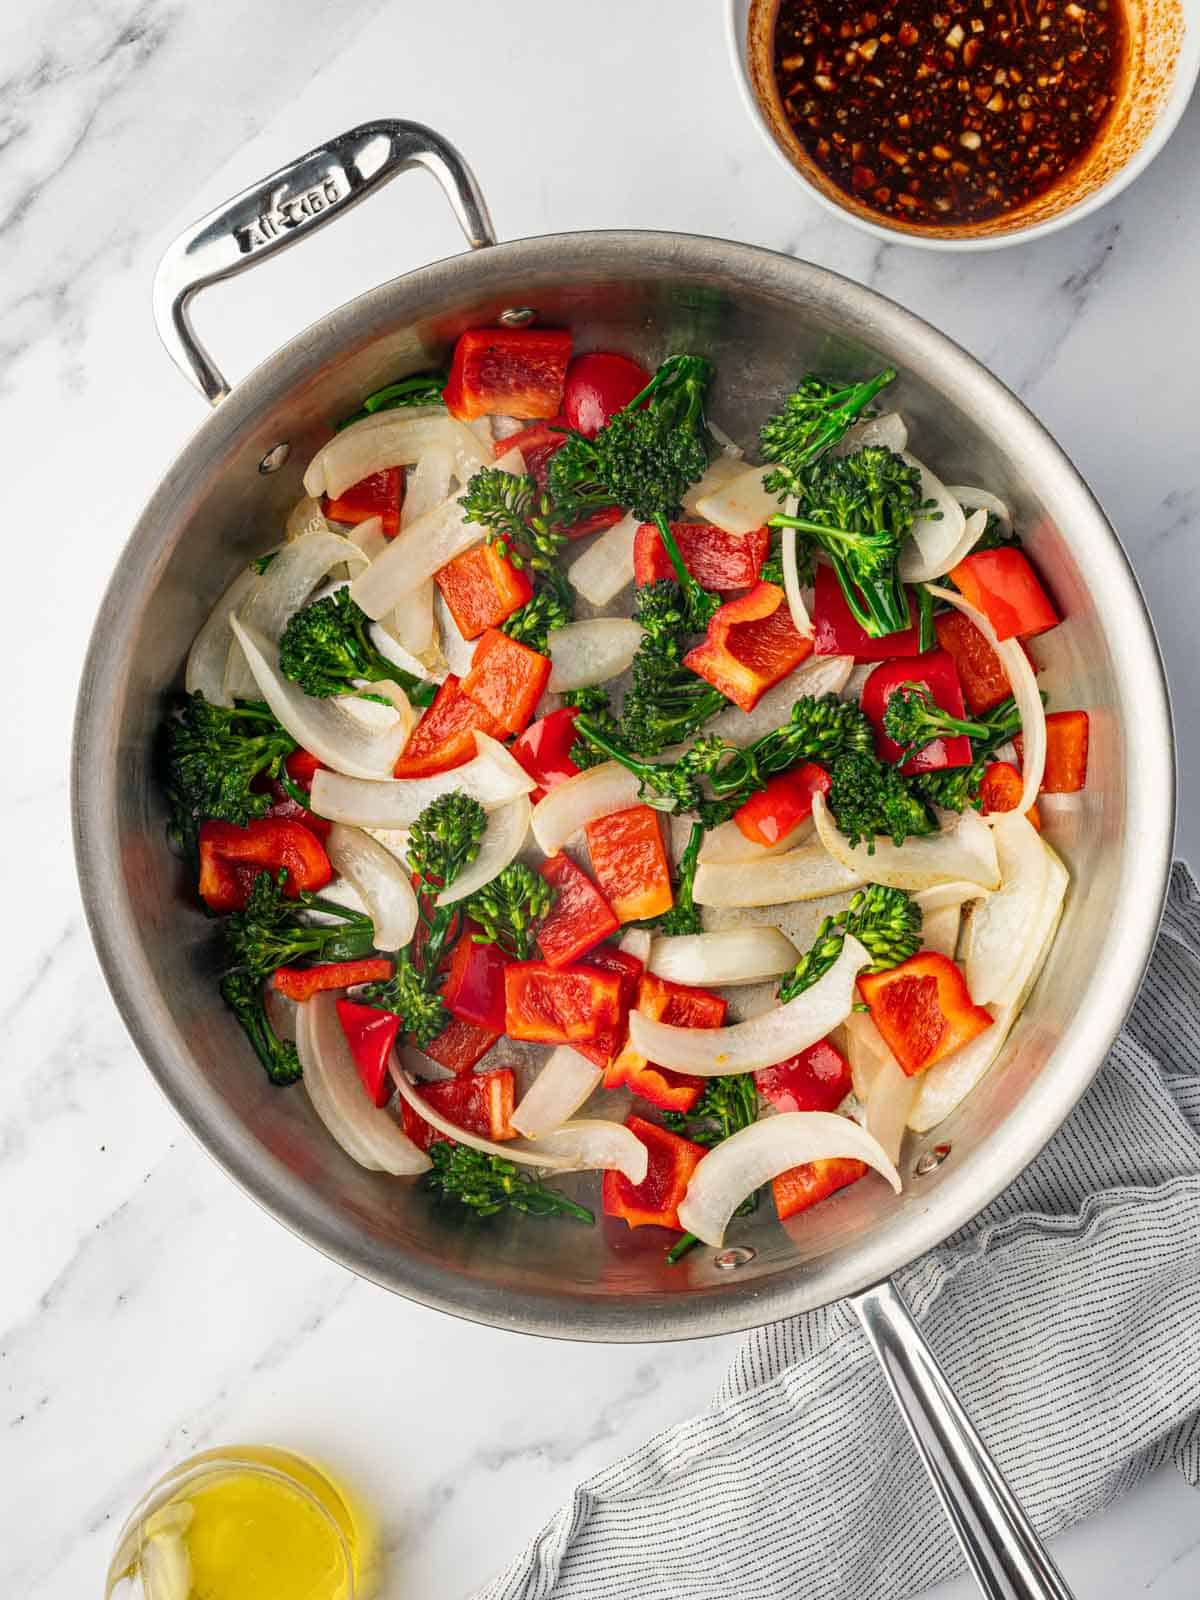 Fresh vegetables are stirfried in a skillet.